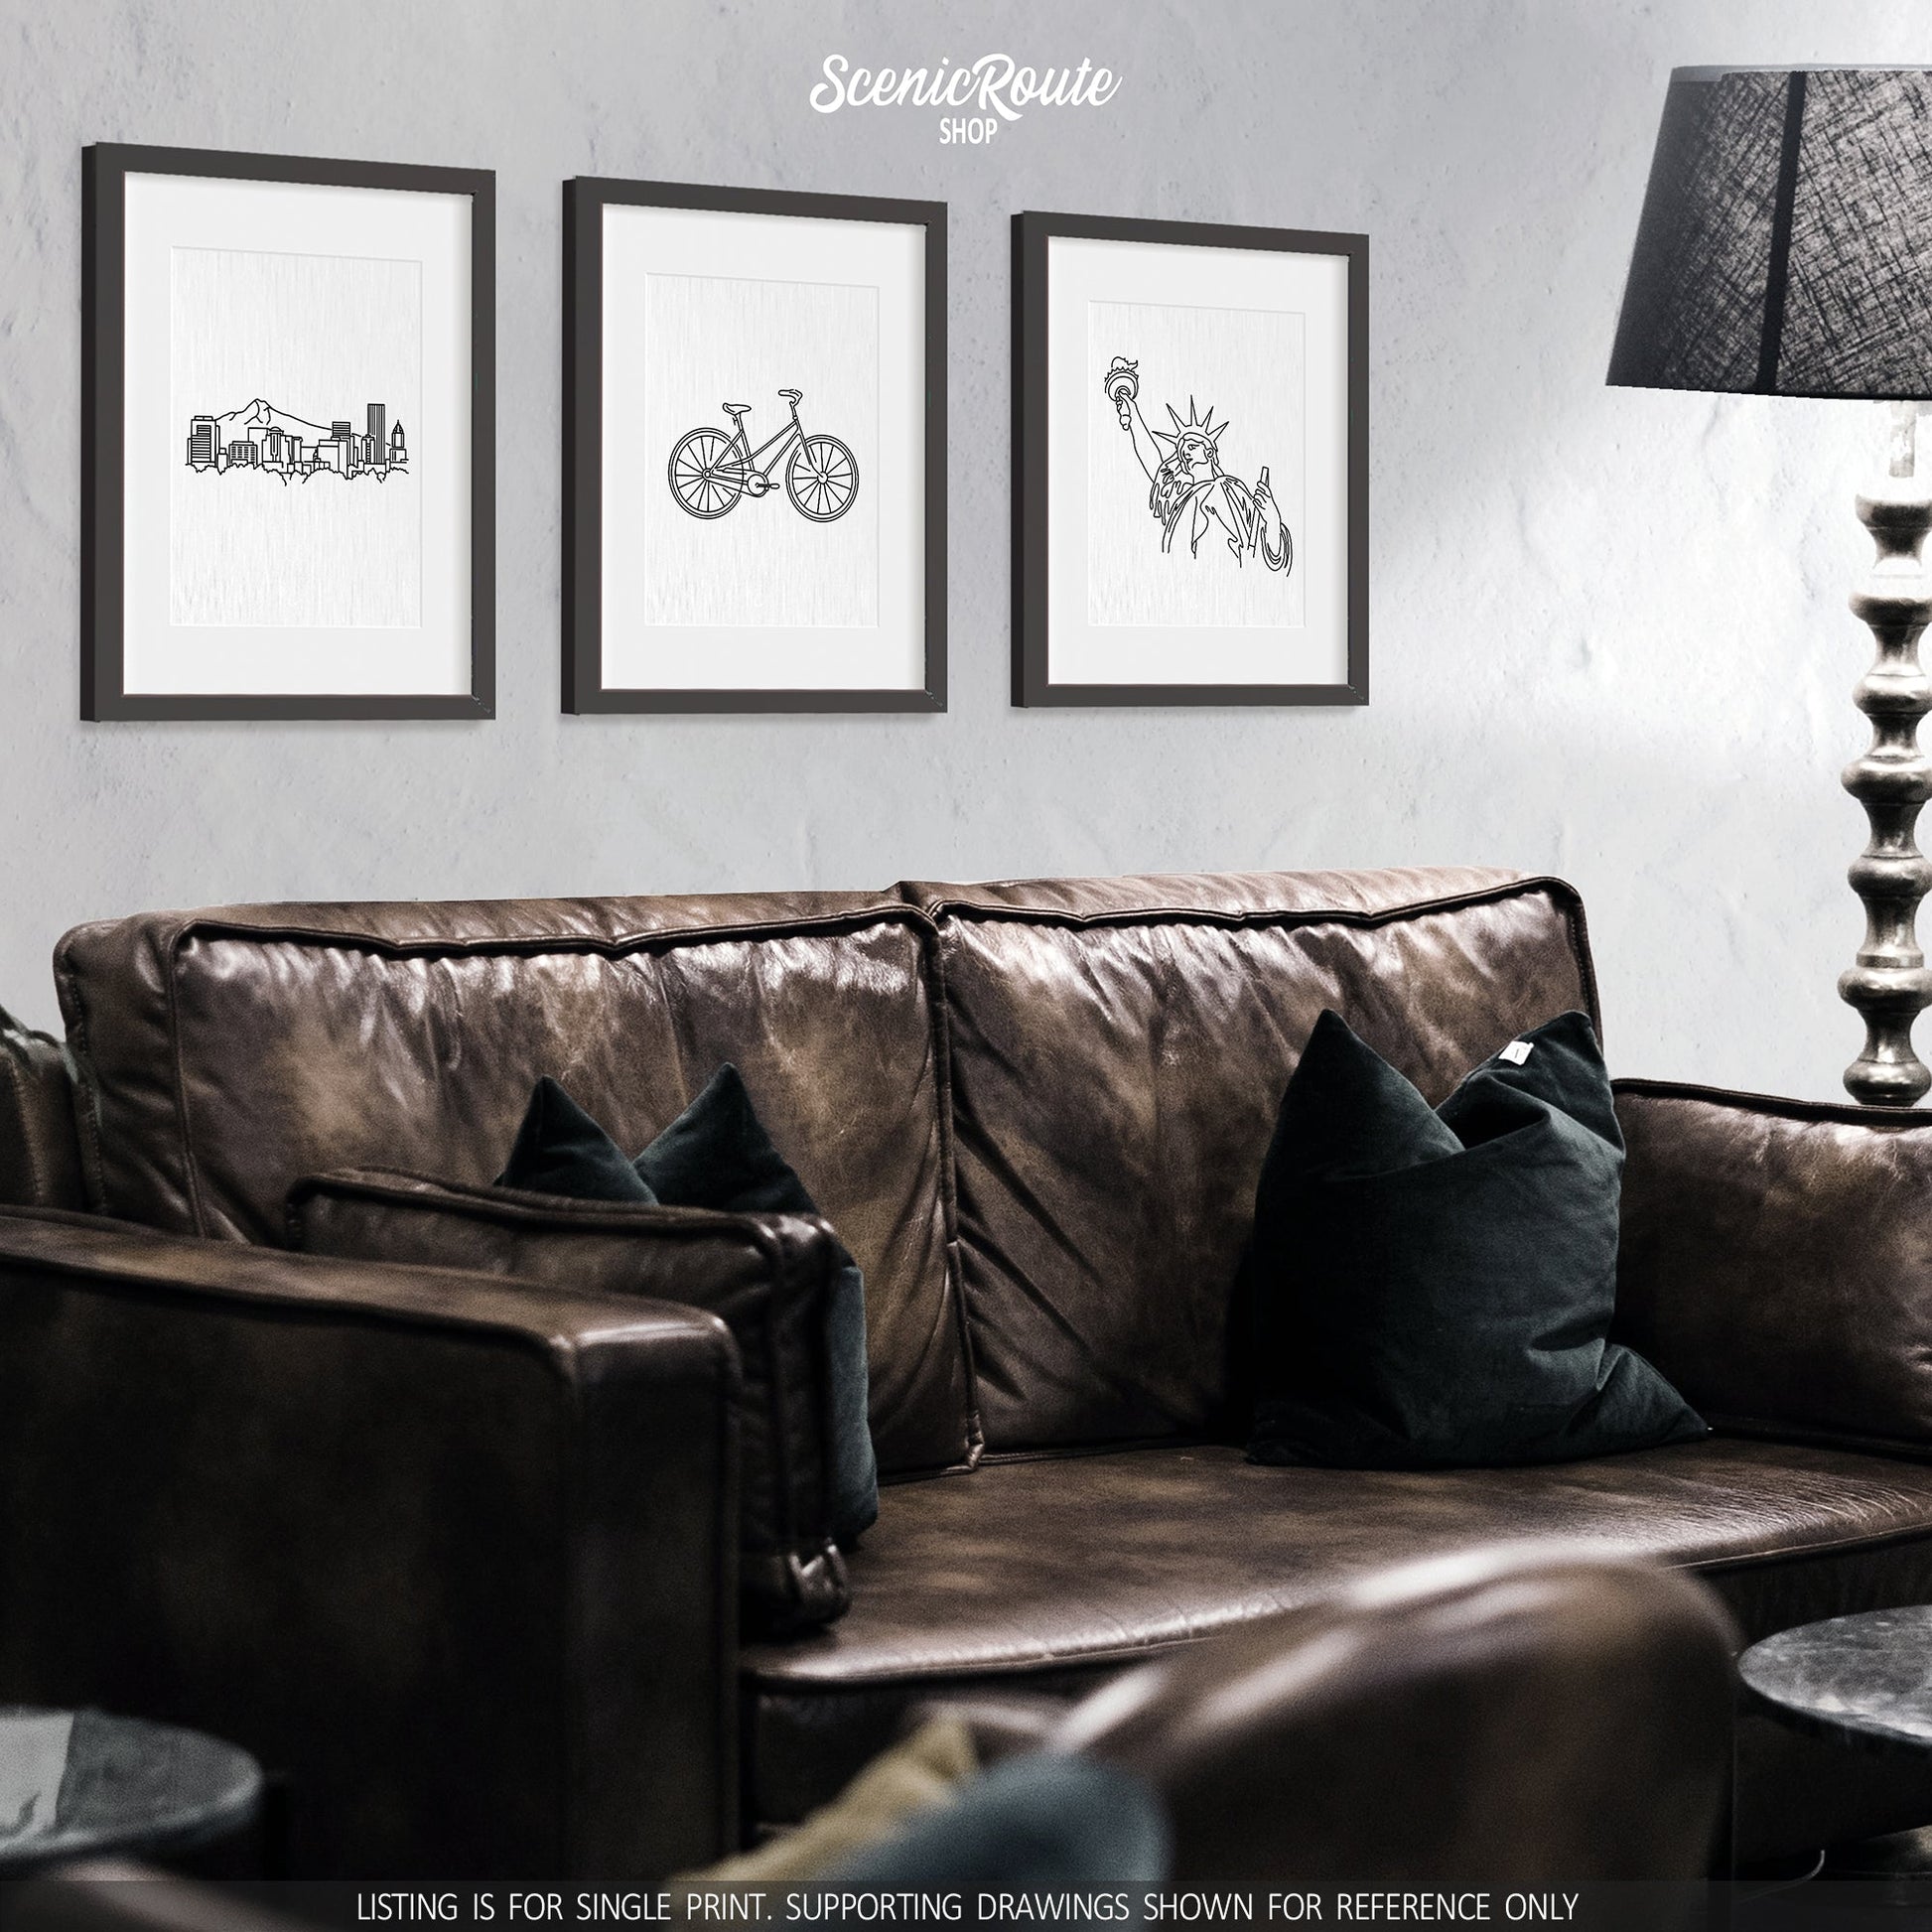 A group of three framed drawings on a wall above a dark leather couch. The line art drawings include the Portland Skyline, a Bicycle, and the Statue of Liberty